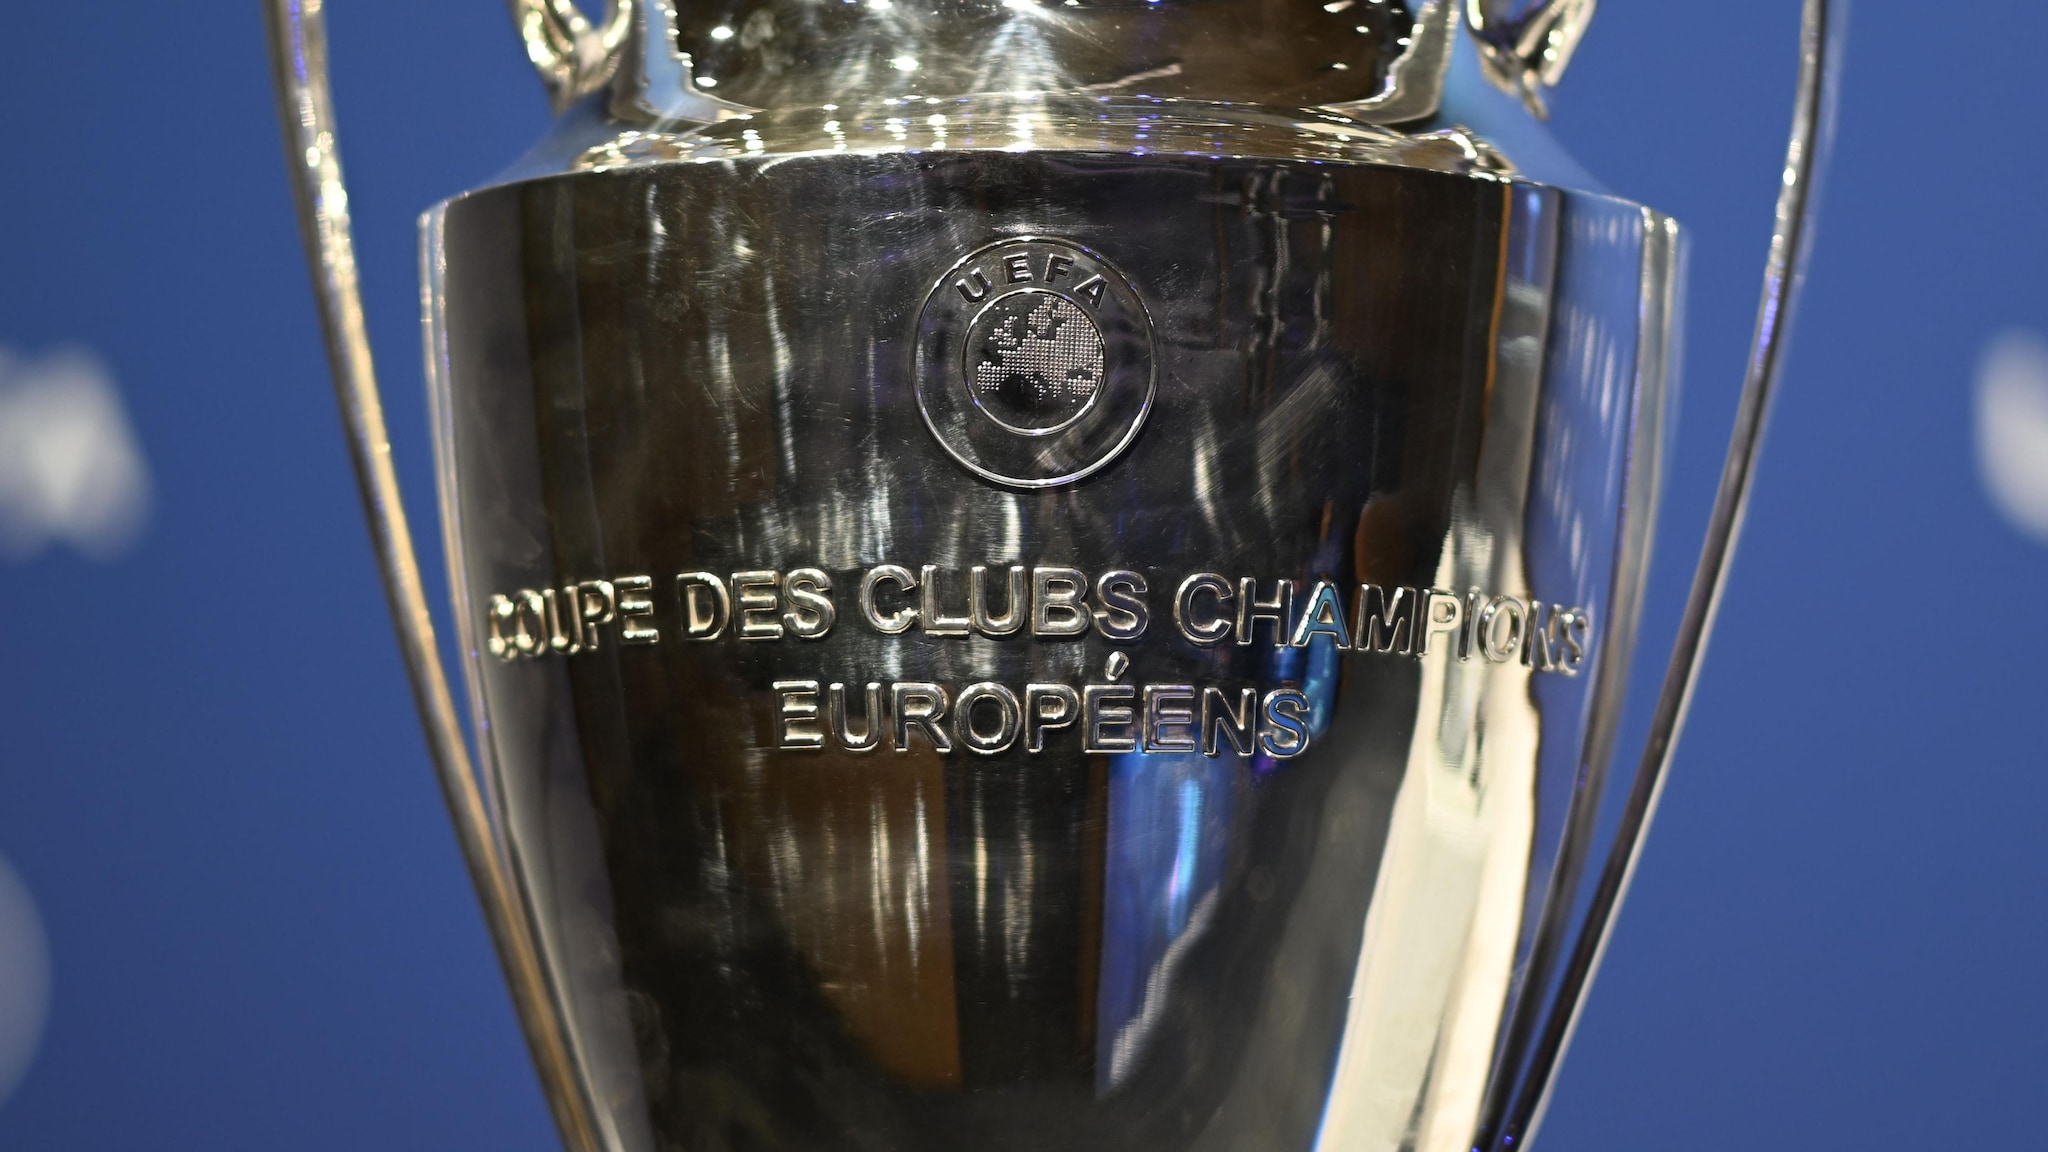 UEFA Champions League 2021-22 draw: Where to watch live in India